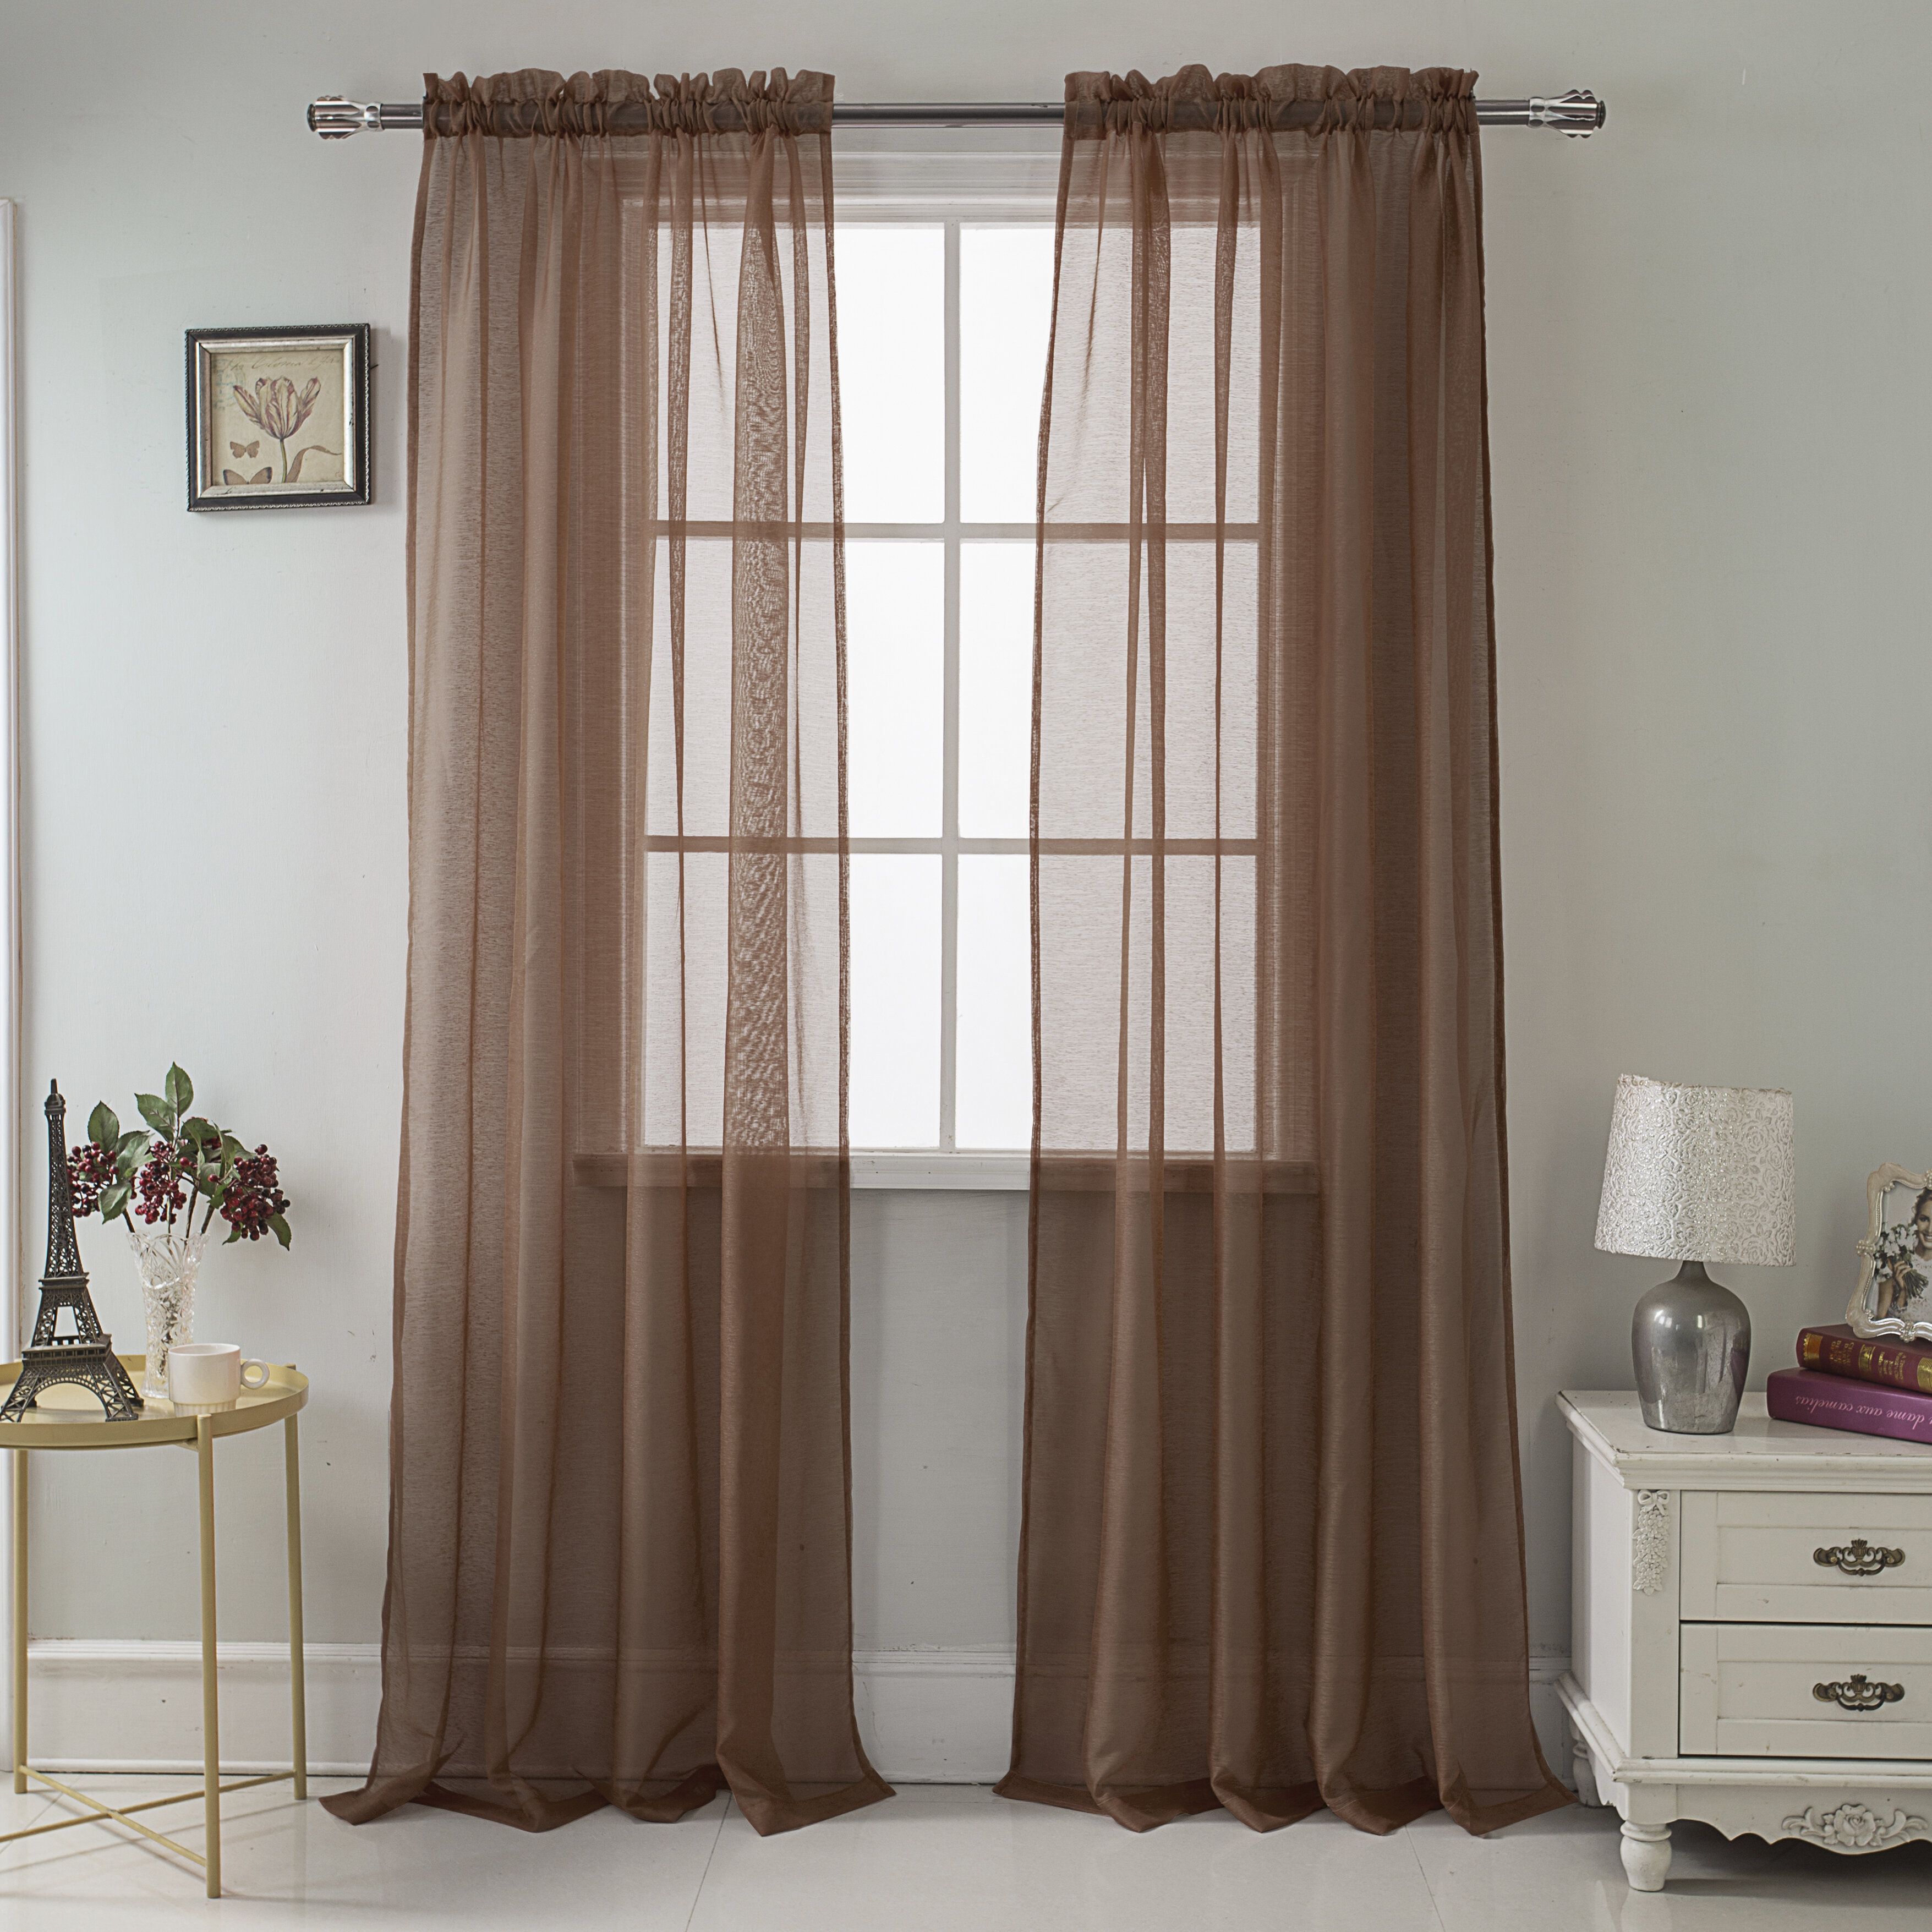 Daron Solid Sheer Rod Pocket Single Curtain Panel Regarding Arm And Hammer Curtains Fresh Odor Neutralizing Single Curtain Panels (View 18 of 20)